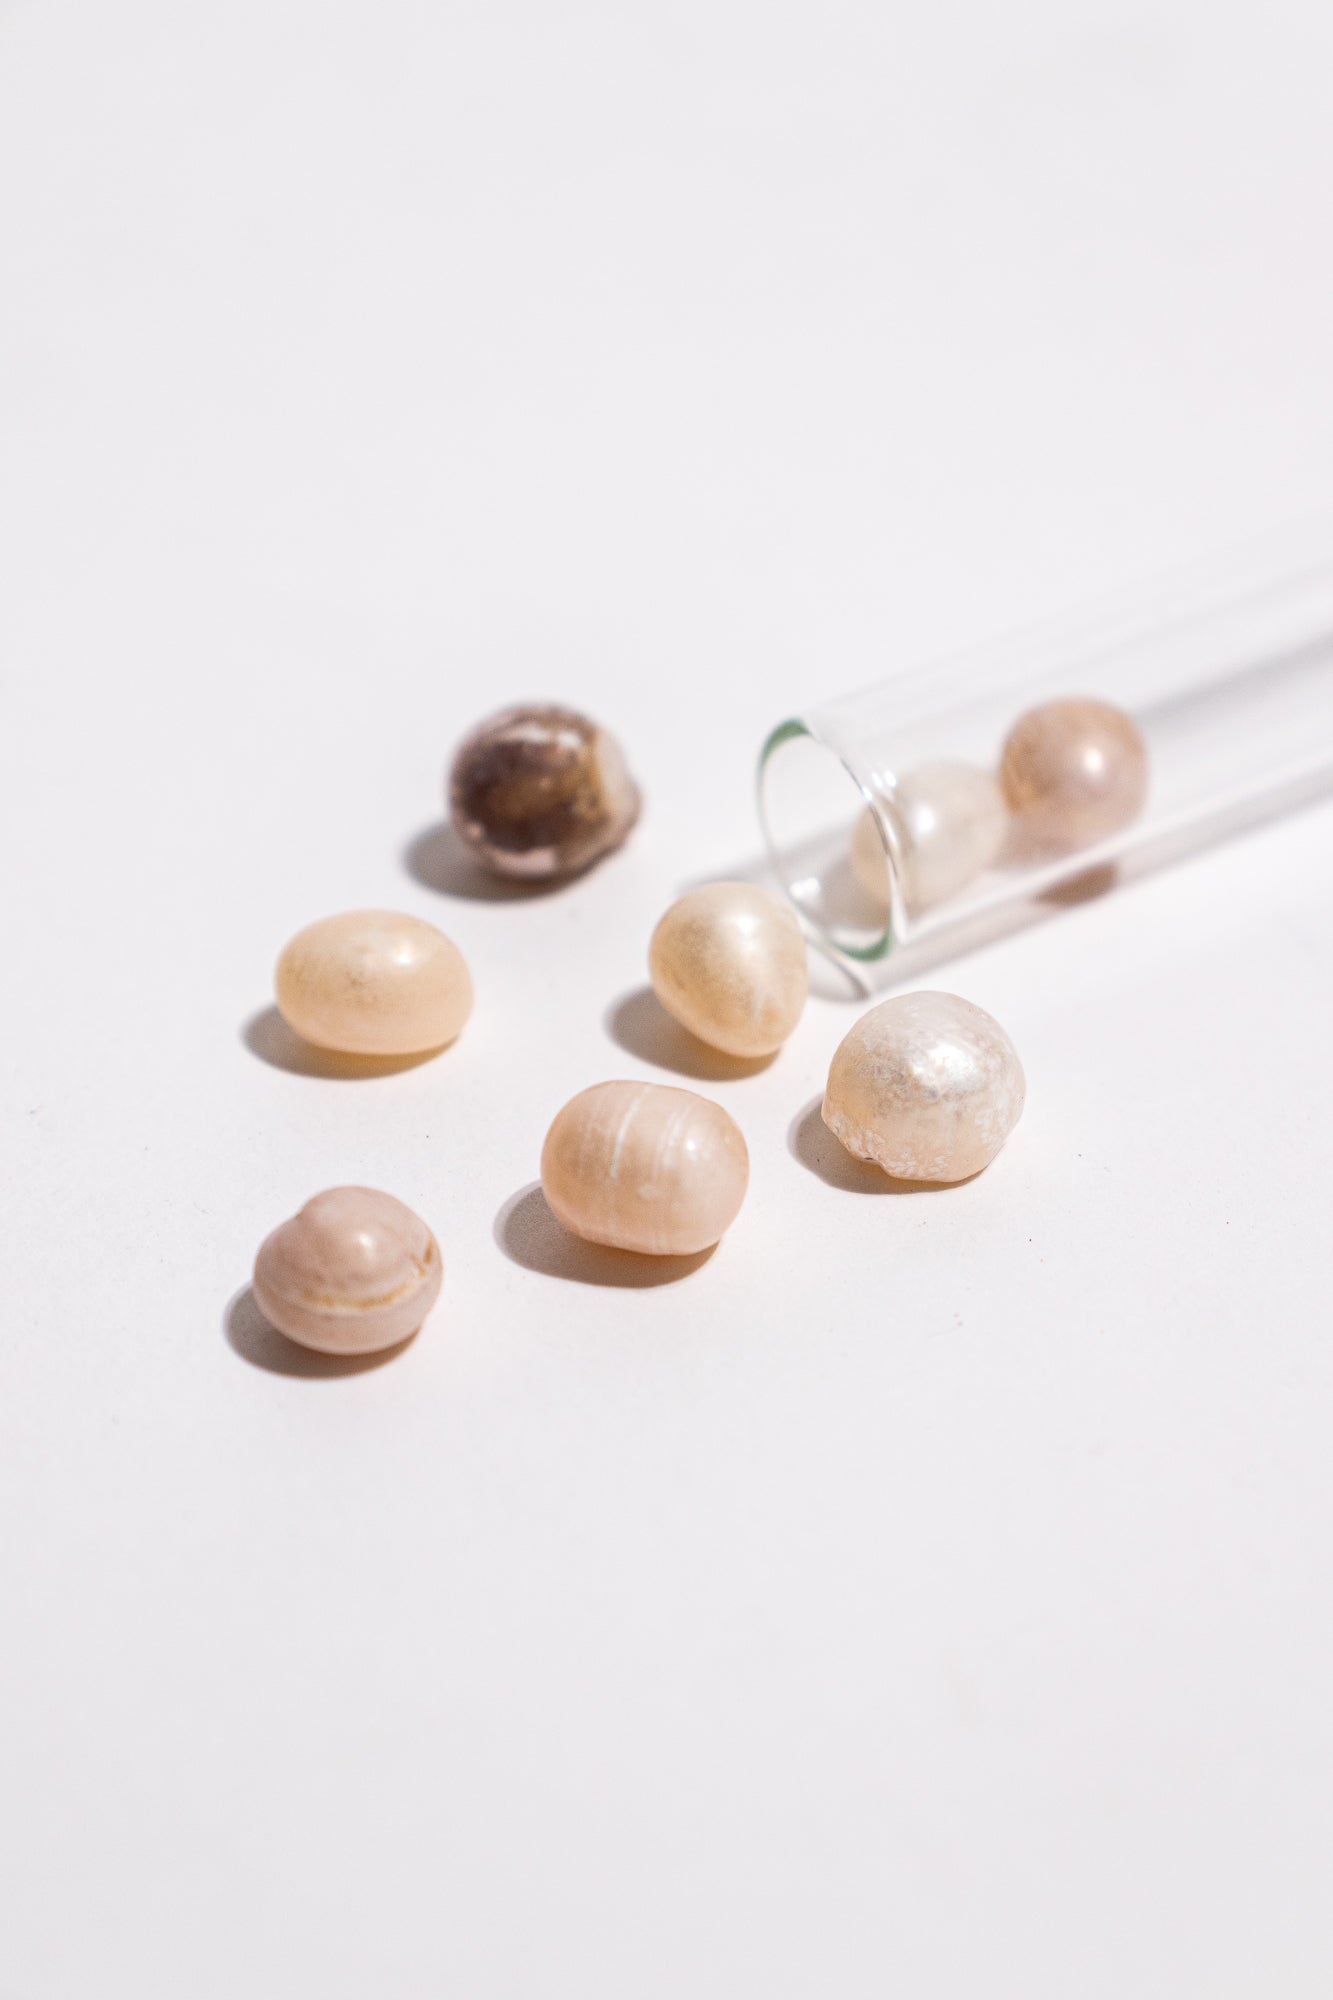 Pearls - Stemcell Science Shop